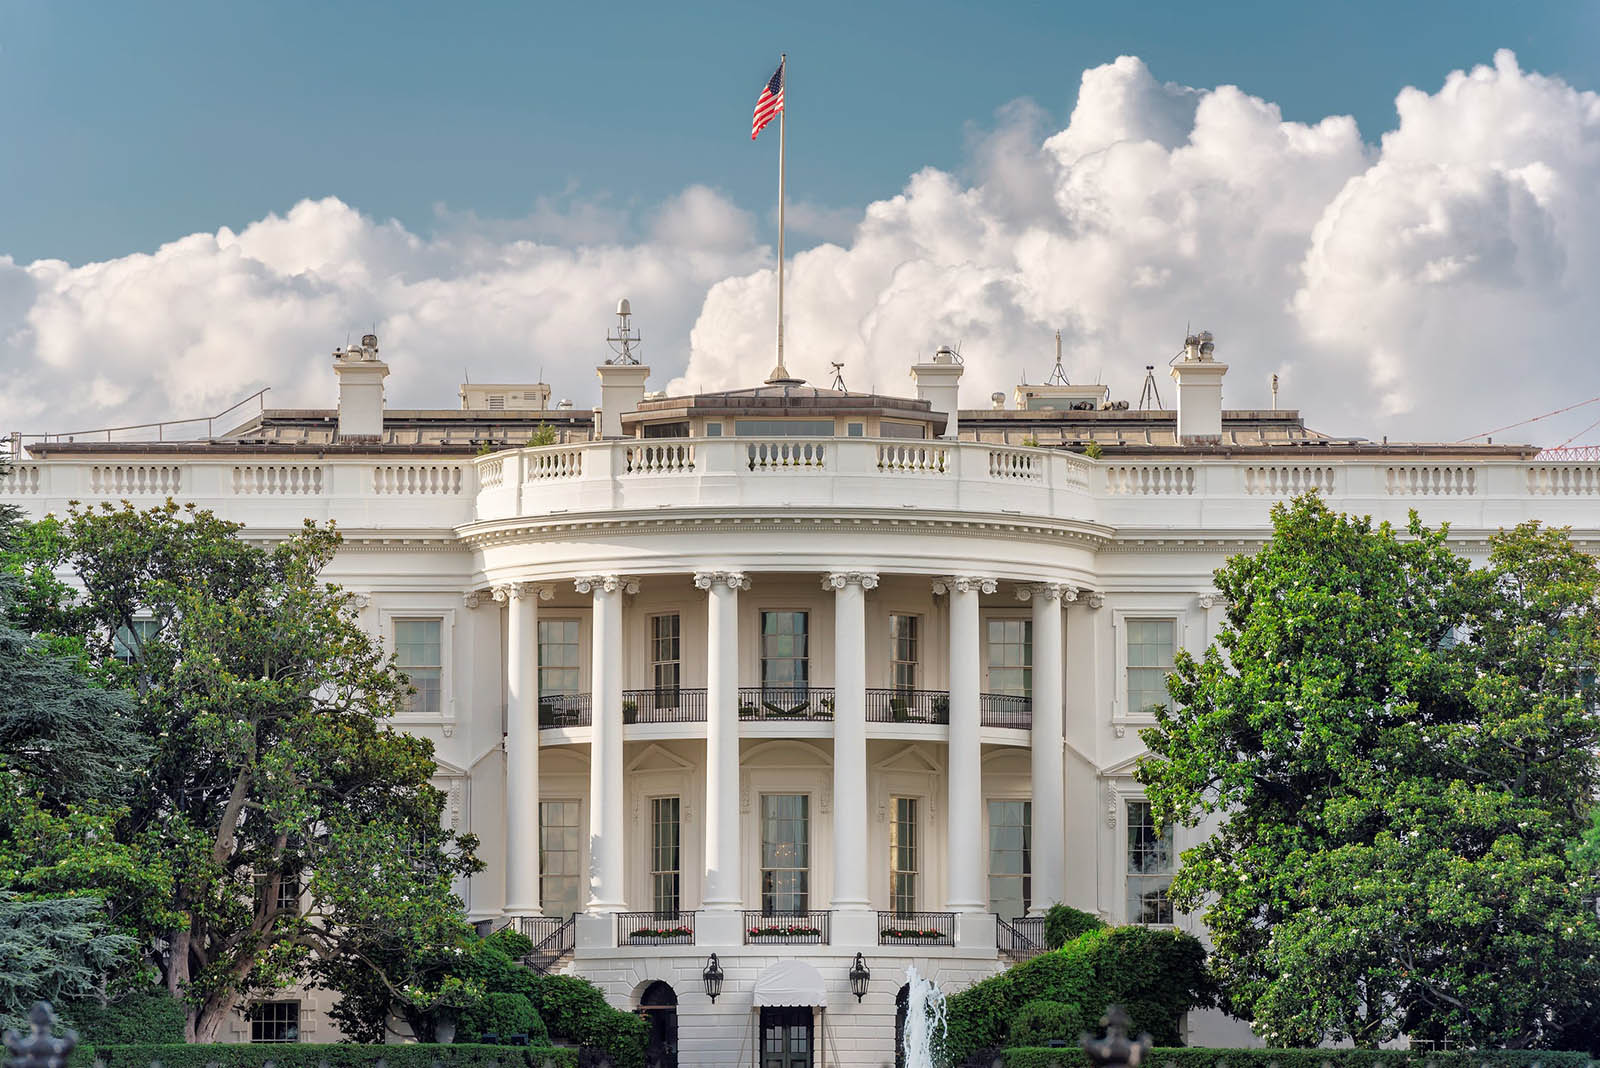 Can You Score Better Than 80% On This U.S. Presidents Quiz? White House, Washington, D.C., United States